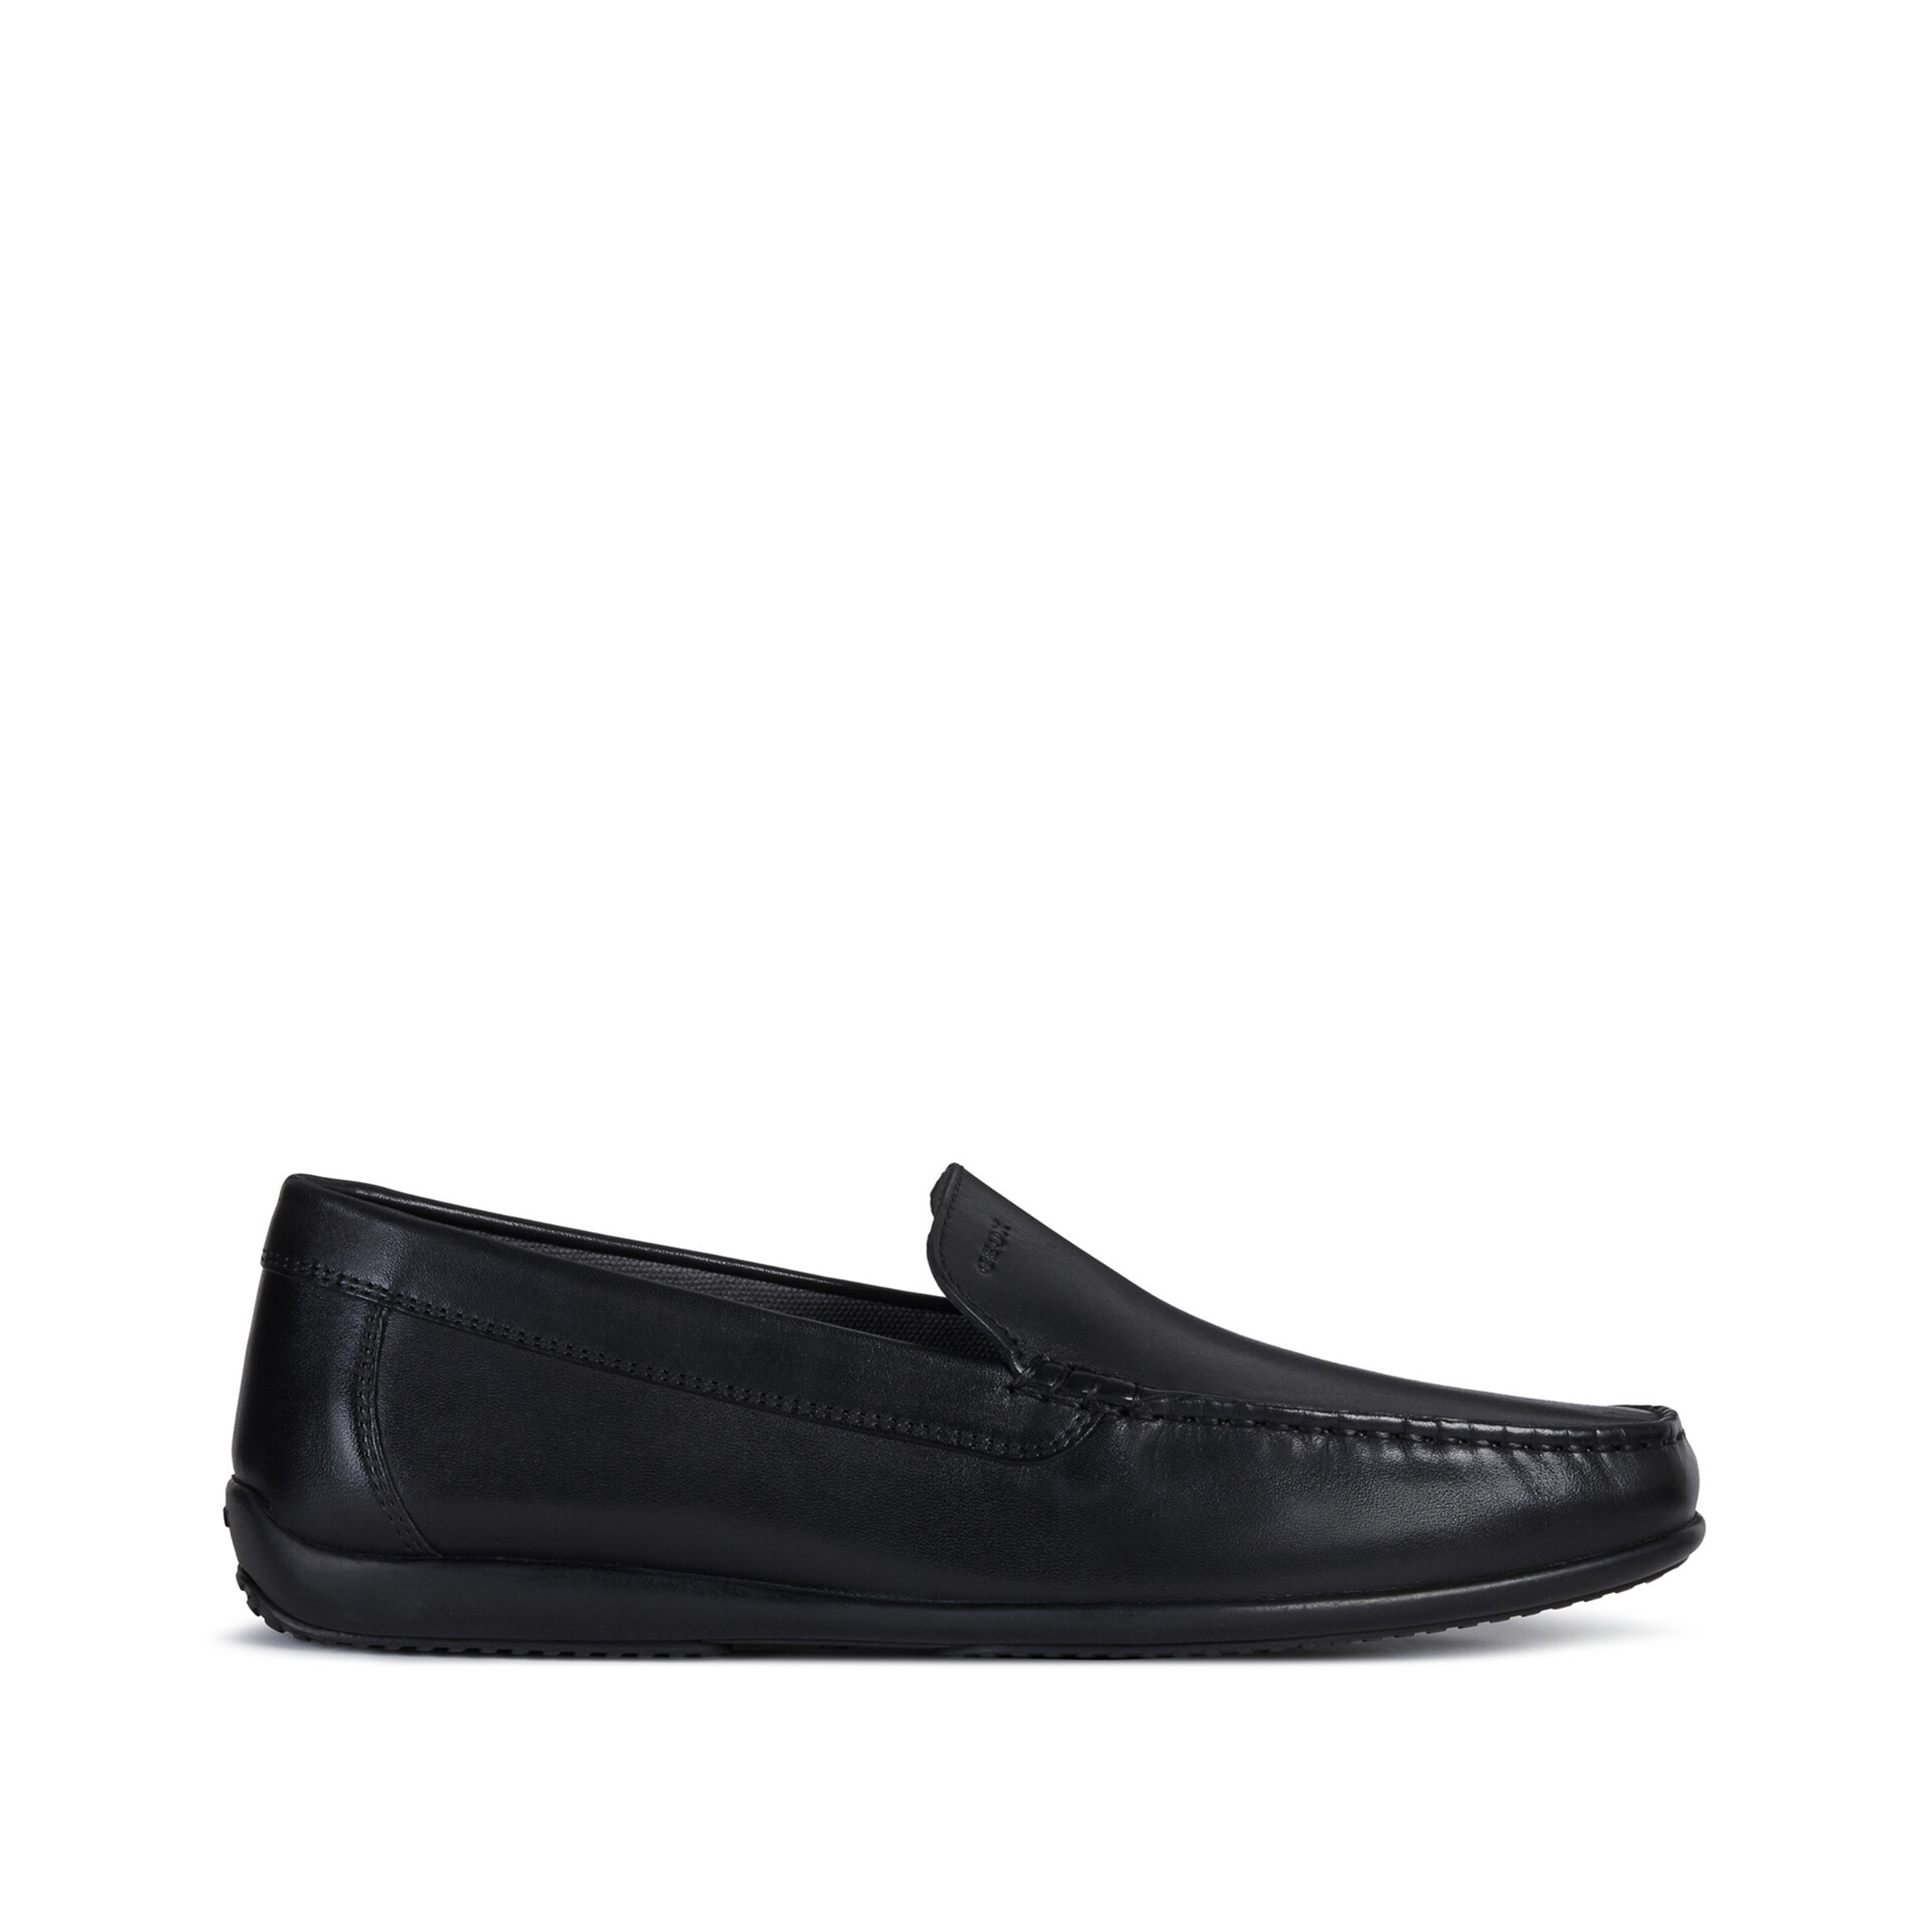 Ascanio leather loafers, black, Geox | La Redoute